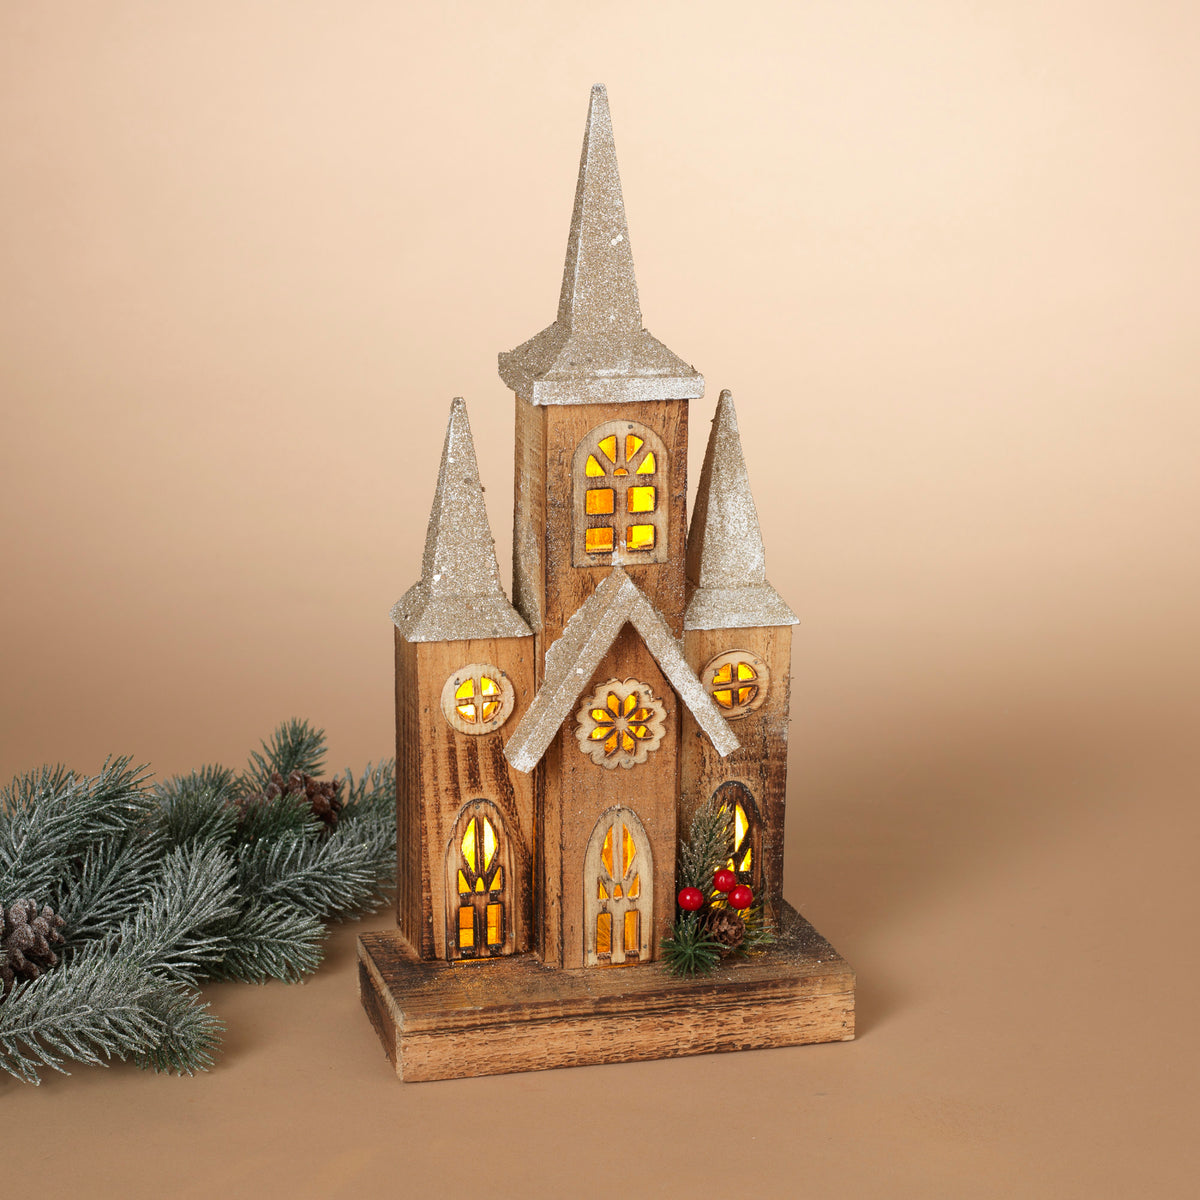 16"H Lighted Wood House